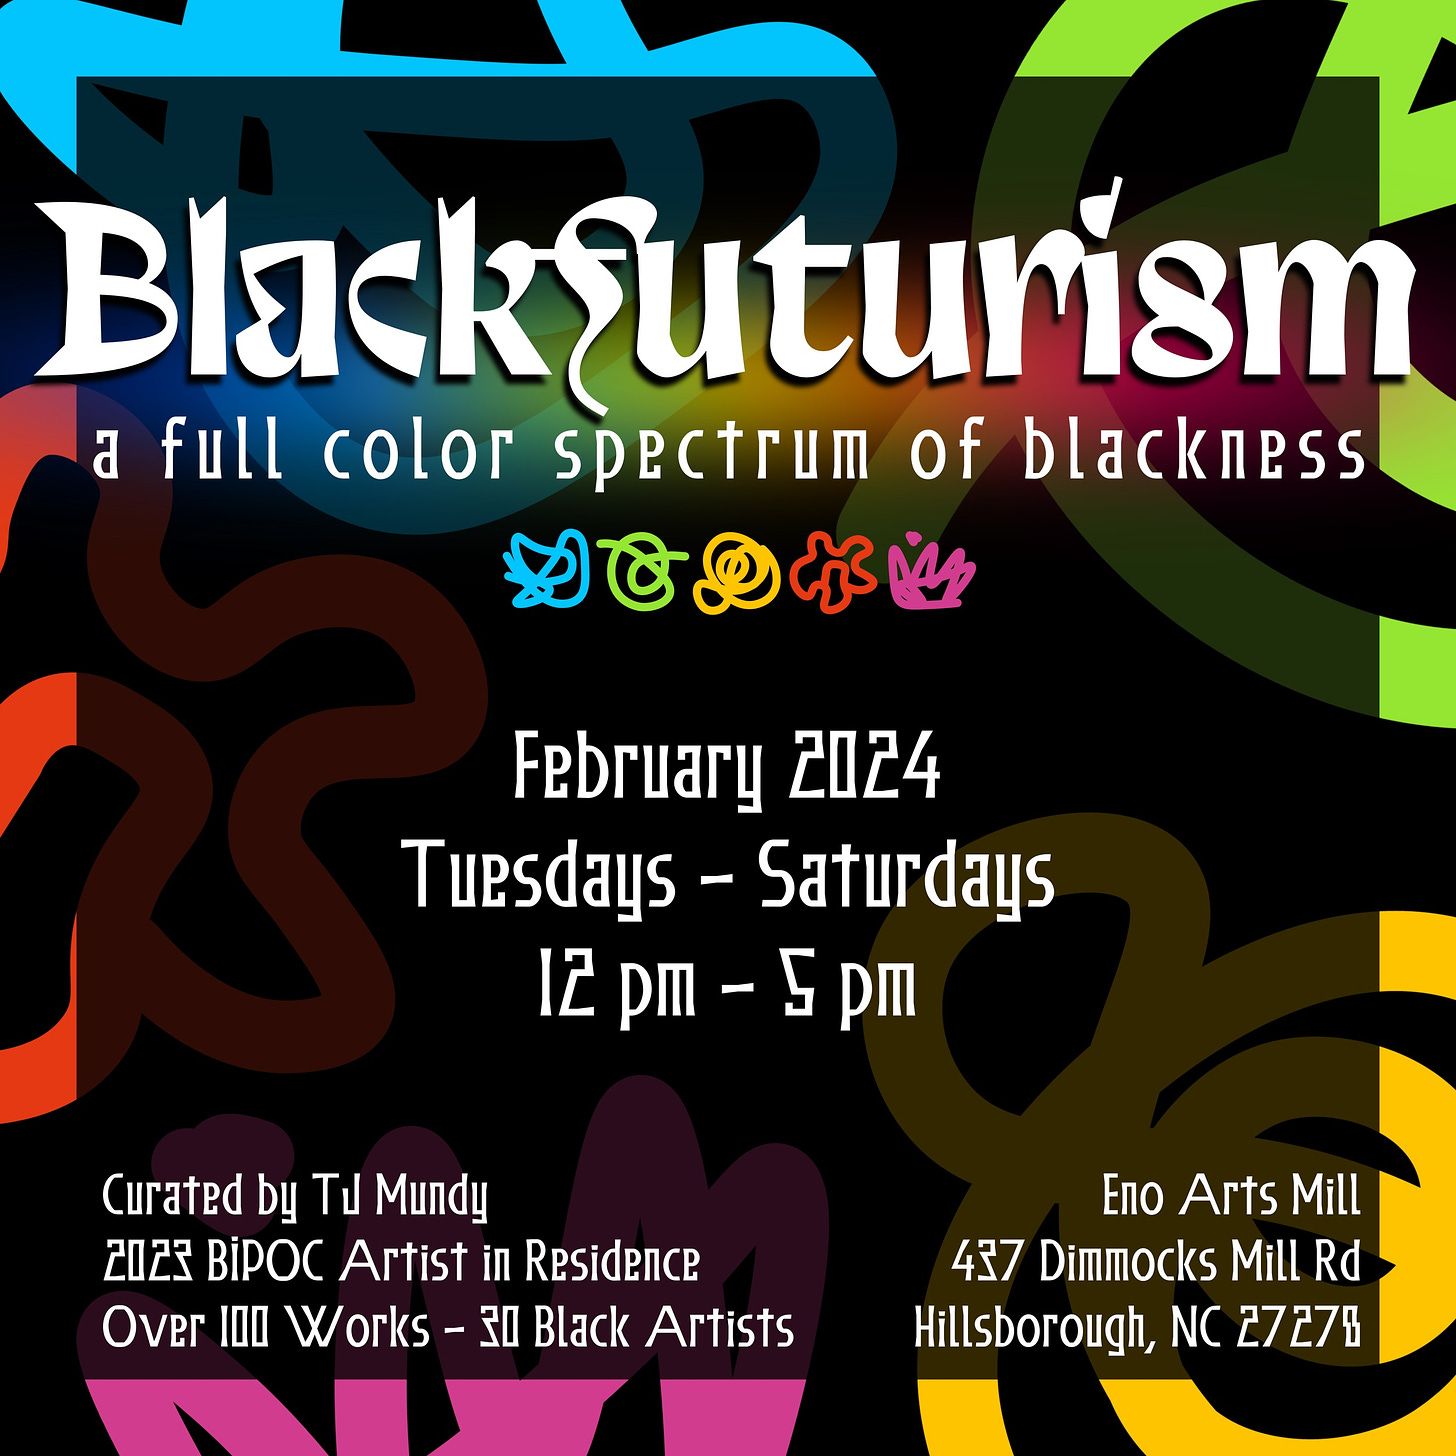 Promo image for Blackfuturism: a full color spectrum of blackness, Feb. 2024, Tu-Sat from 12-5 pm at Eno Arts Mill. Curated by TJ Mundy, 2023 BIPOC Artist in Residence.